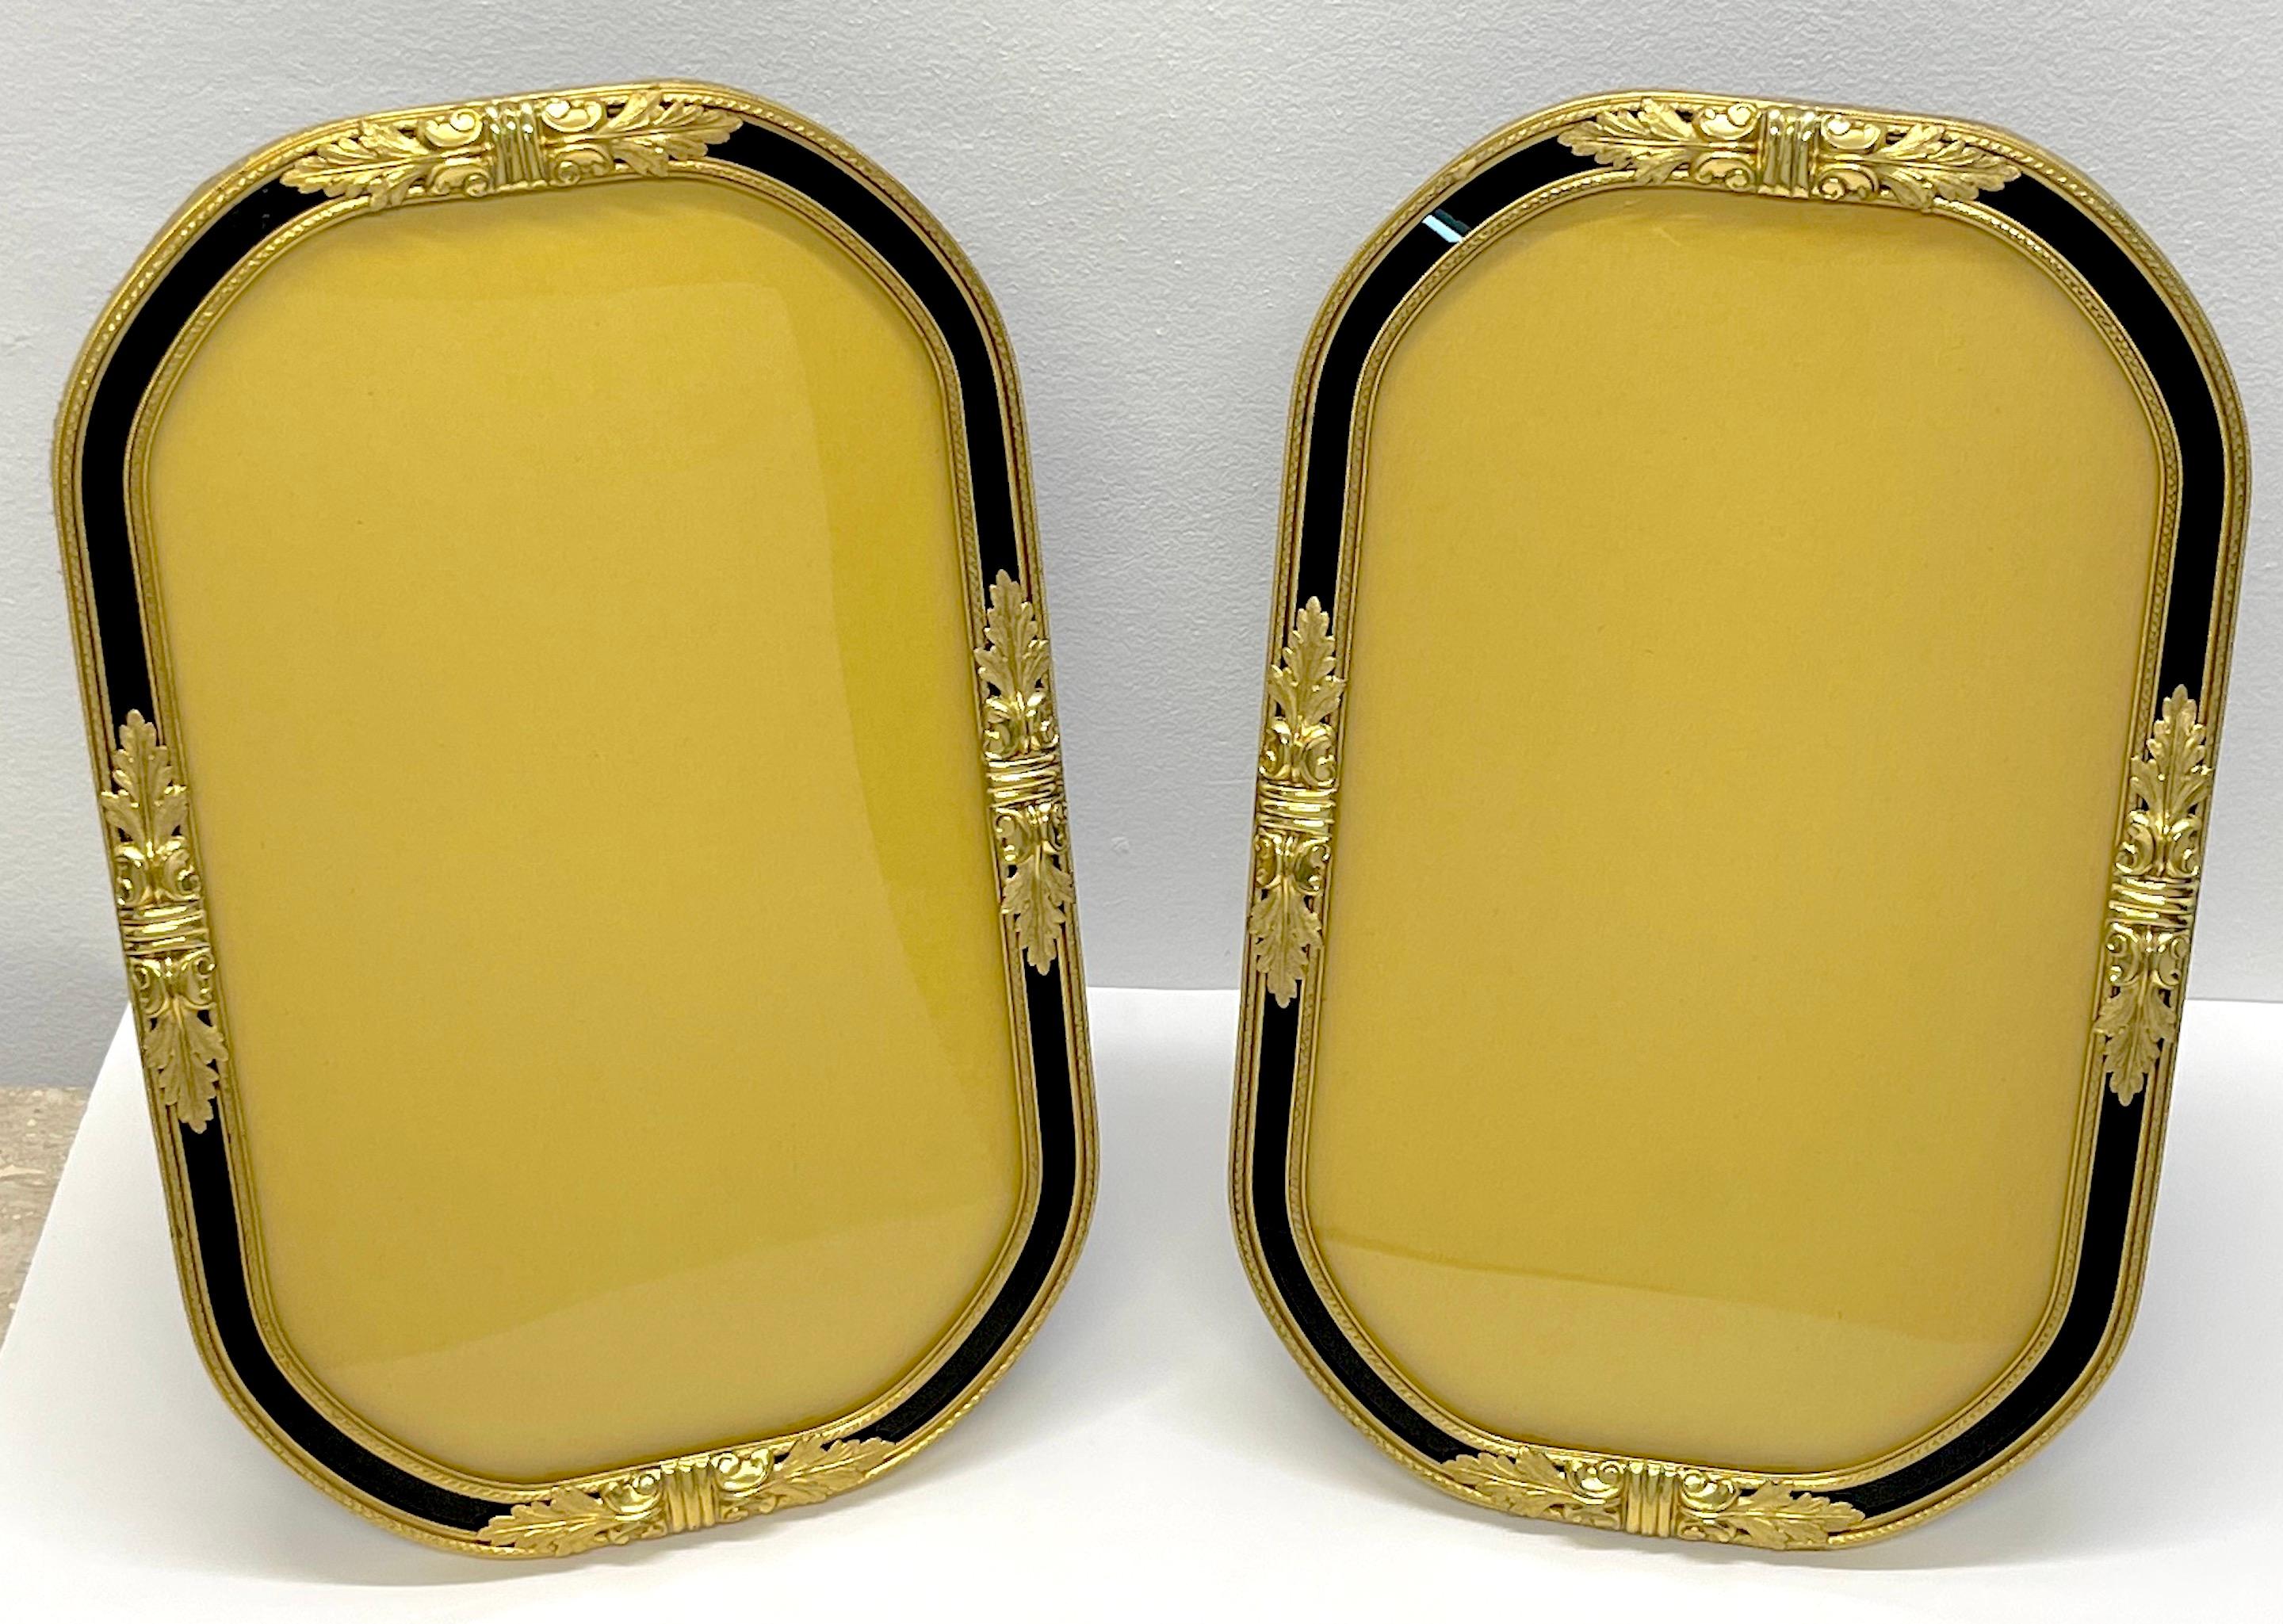 Pair of Large French Belle Époque Neoclassical Ormolu & Enameled Glass Frames
France, circa 1910

A rare find, a stunning matched pair of large ormolu/gilt bronze frames with the original convex (bubble) enameled glass. 
Each frame stands